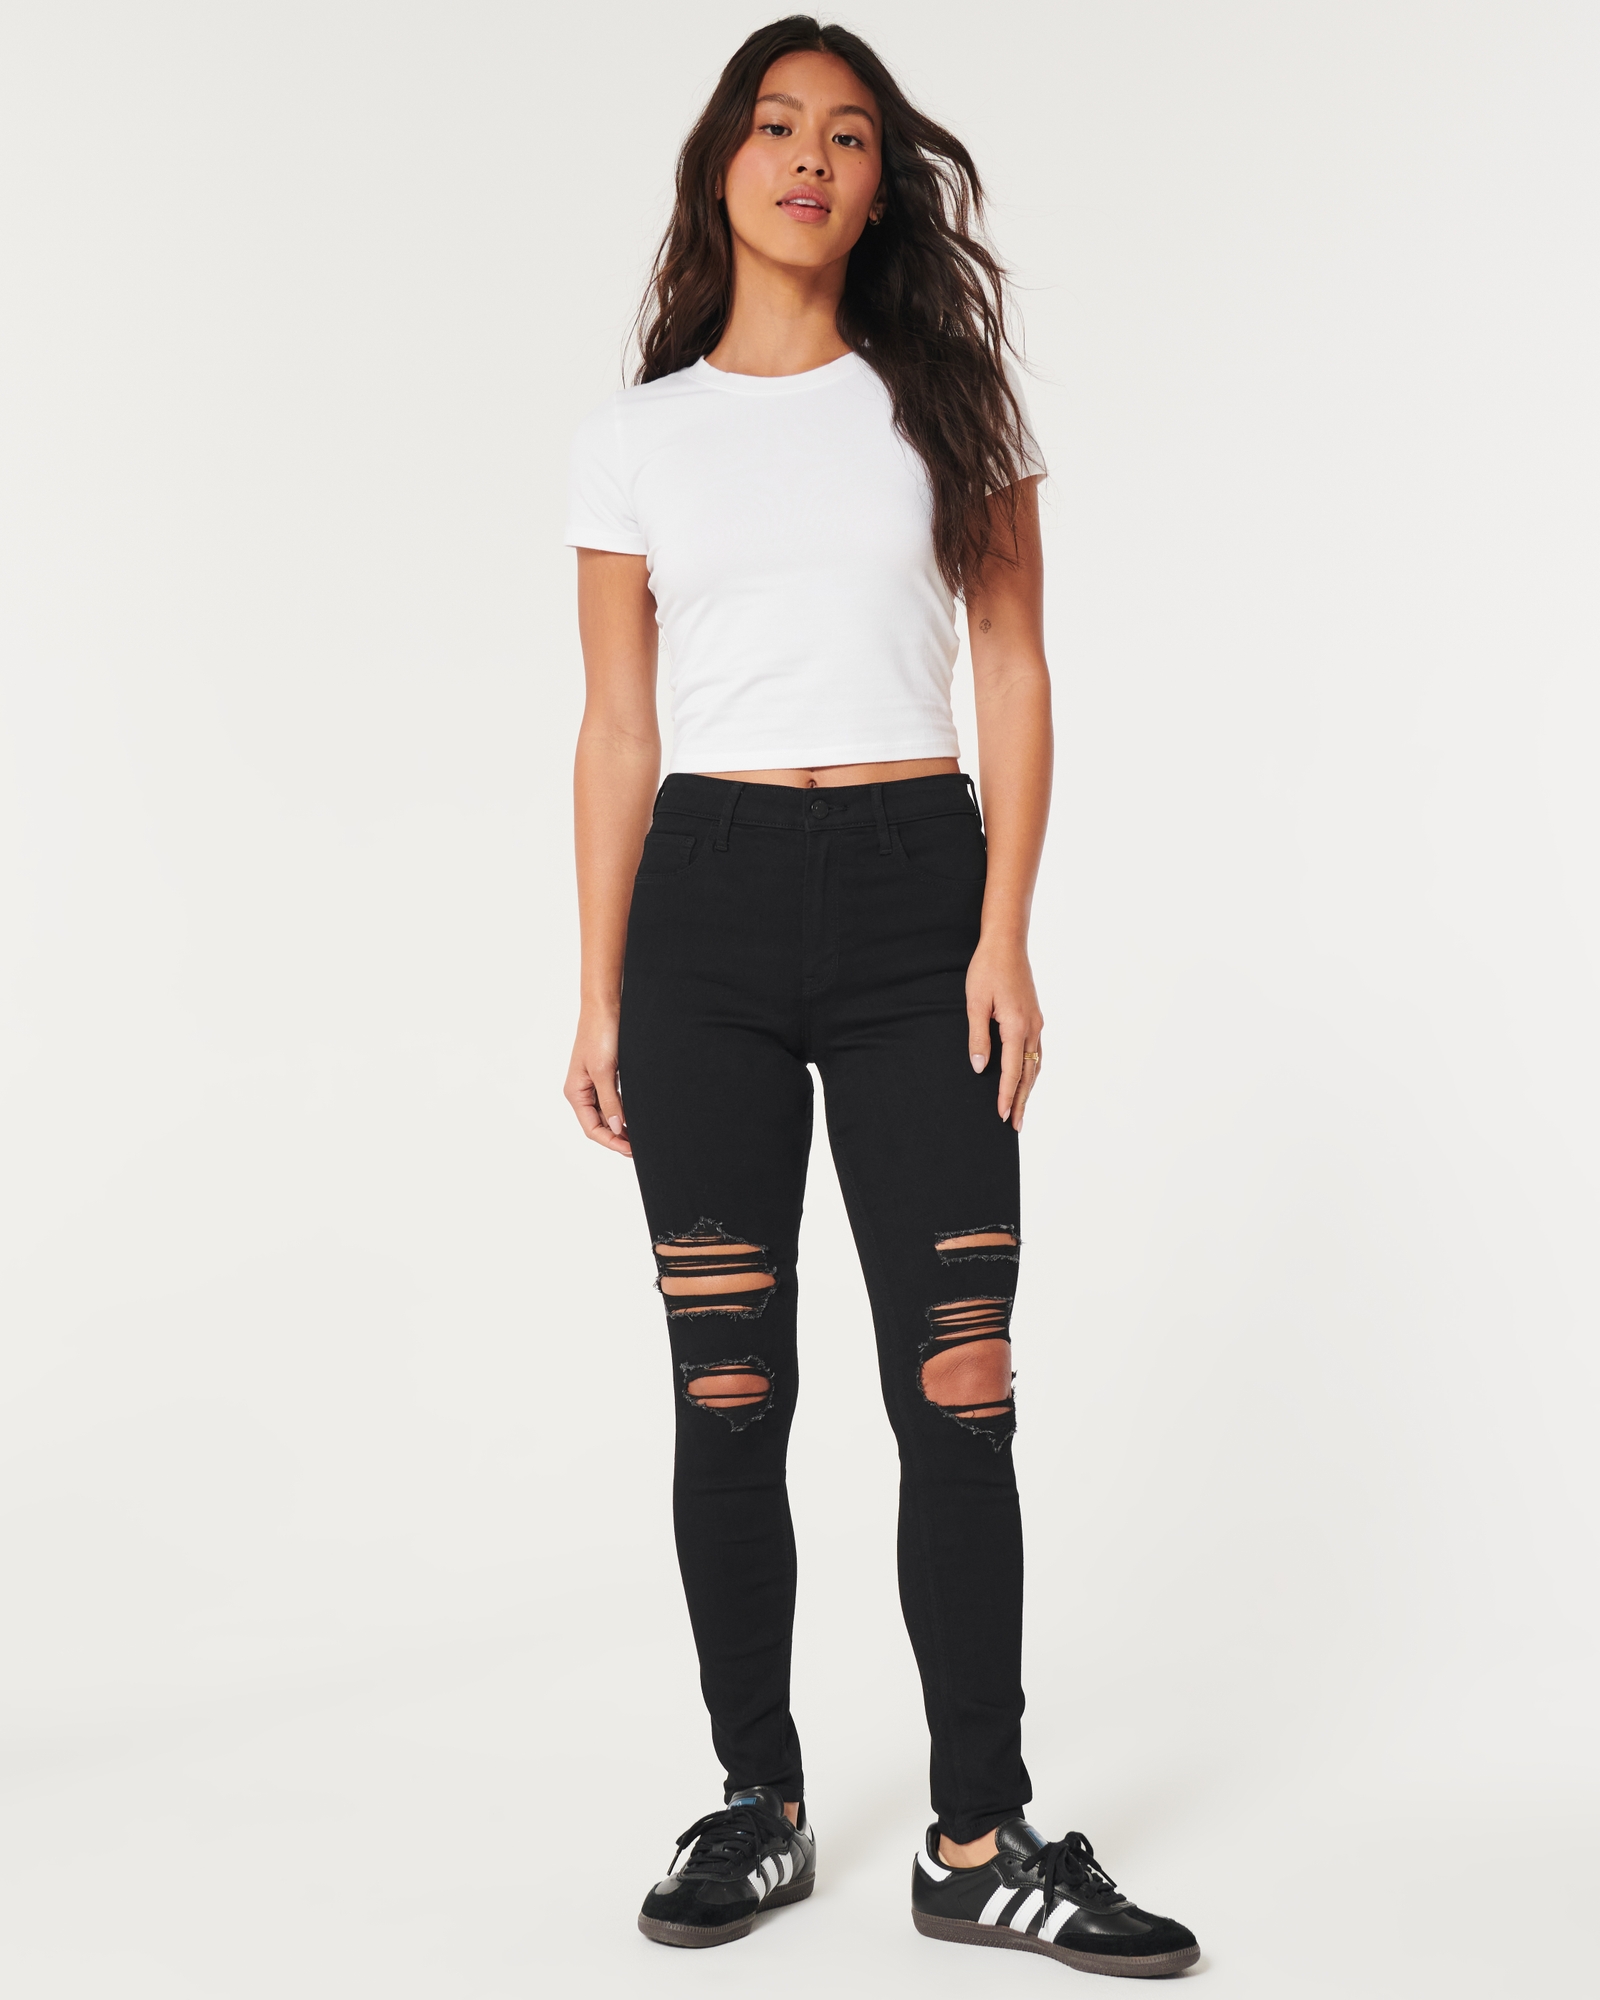 High Waisted Extreme Ripped Skinny Jeans Black 